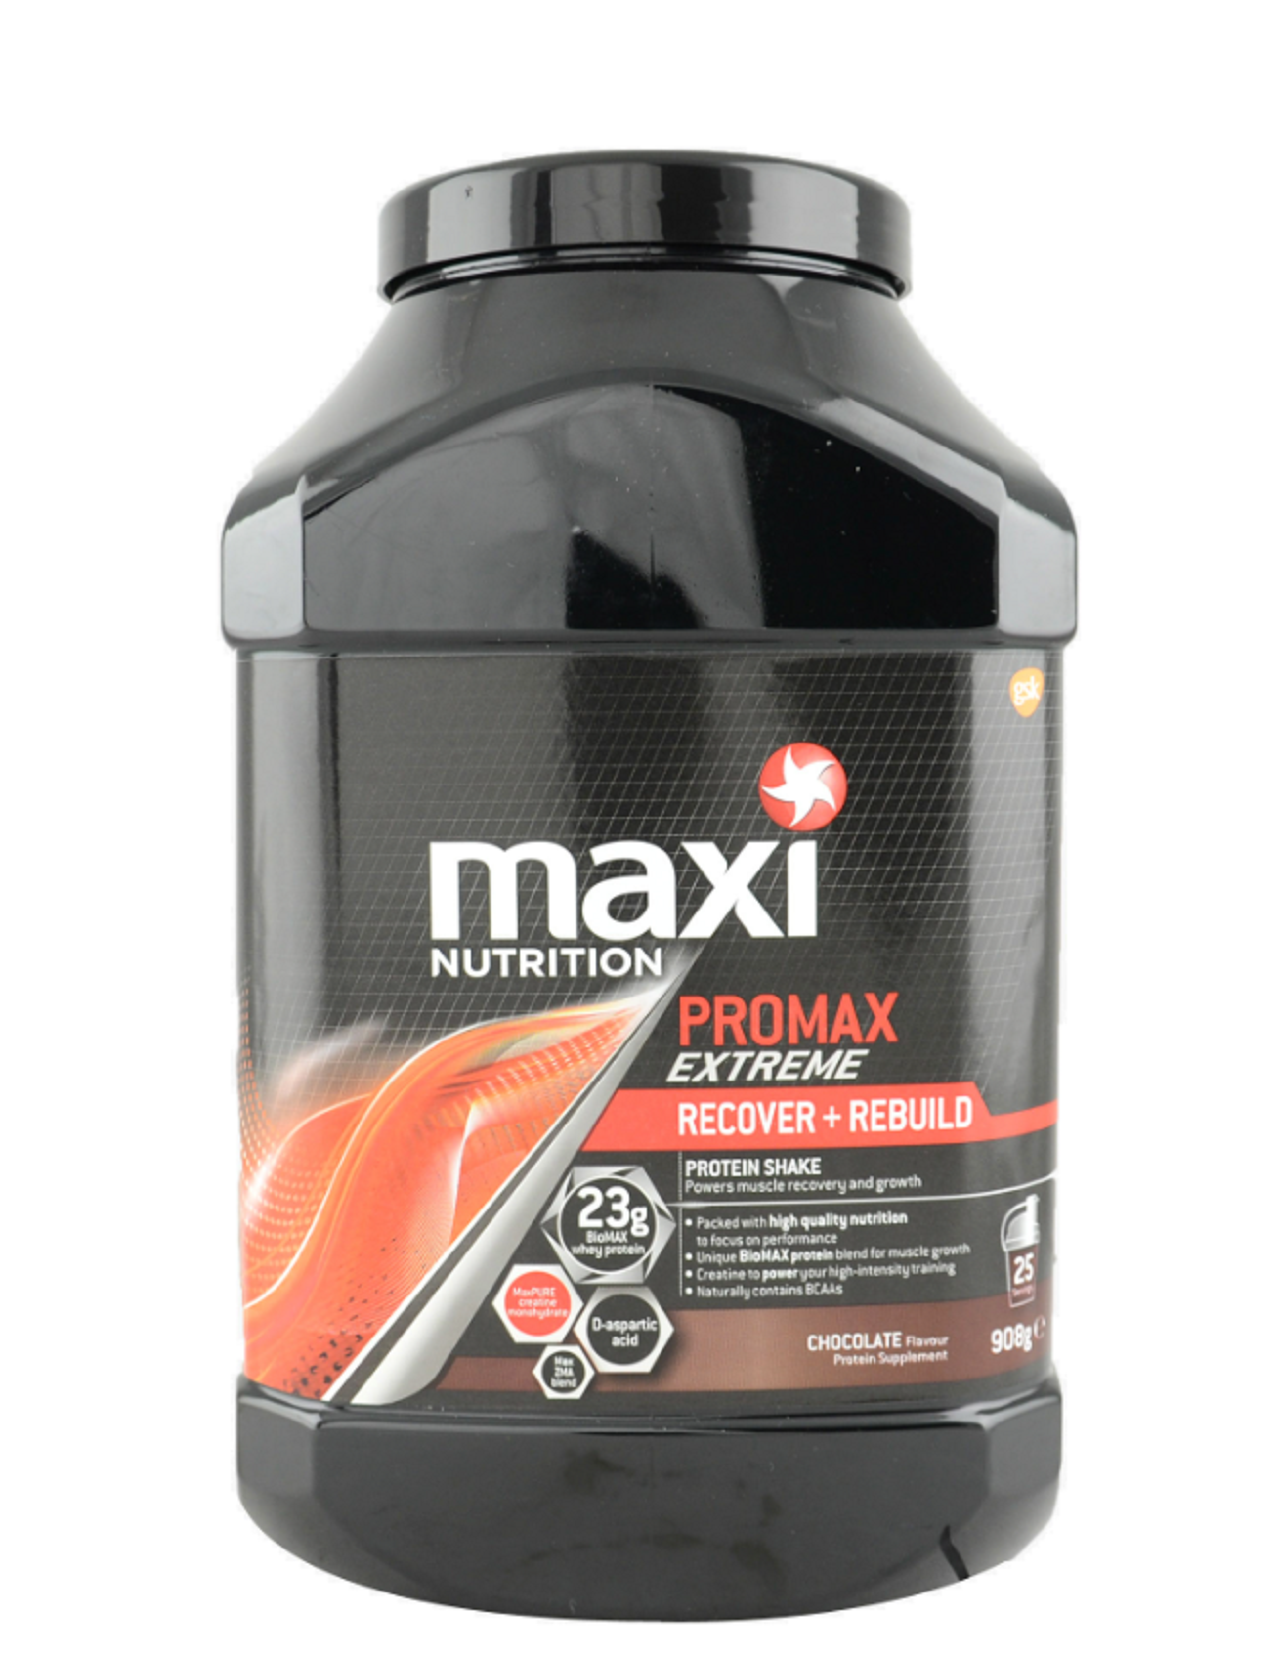 Maximuscle Promax Extreme Review